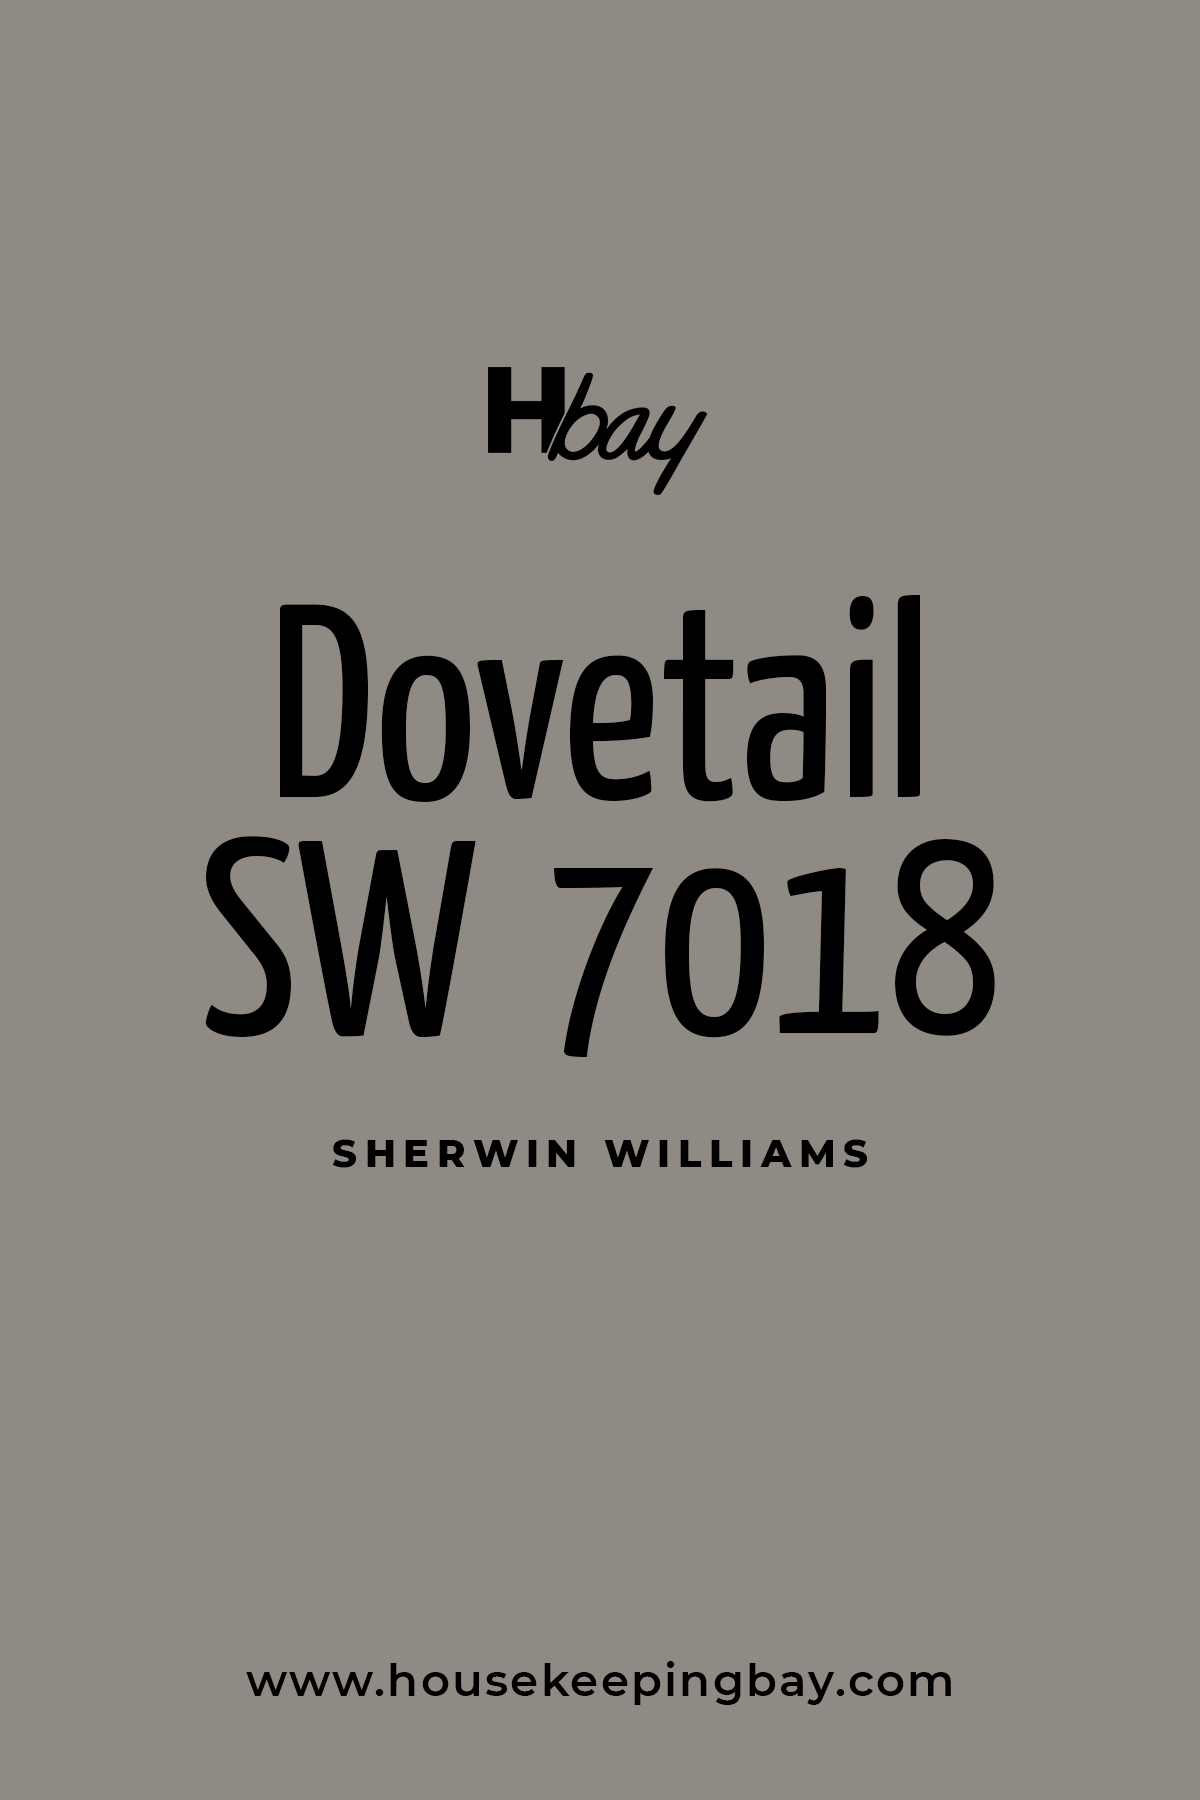 Dovetail SW 7018 by Sherwin Williams (1)